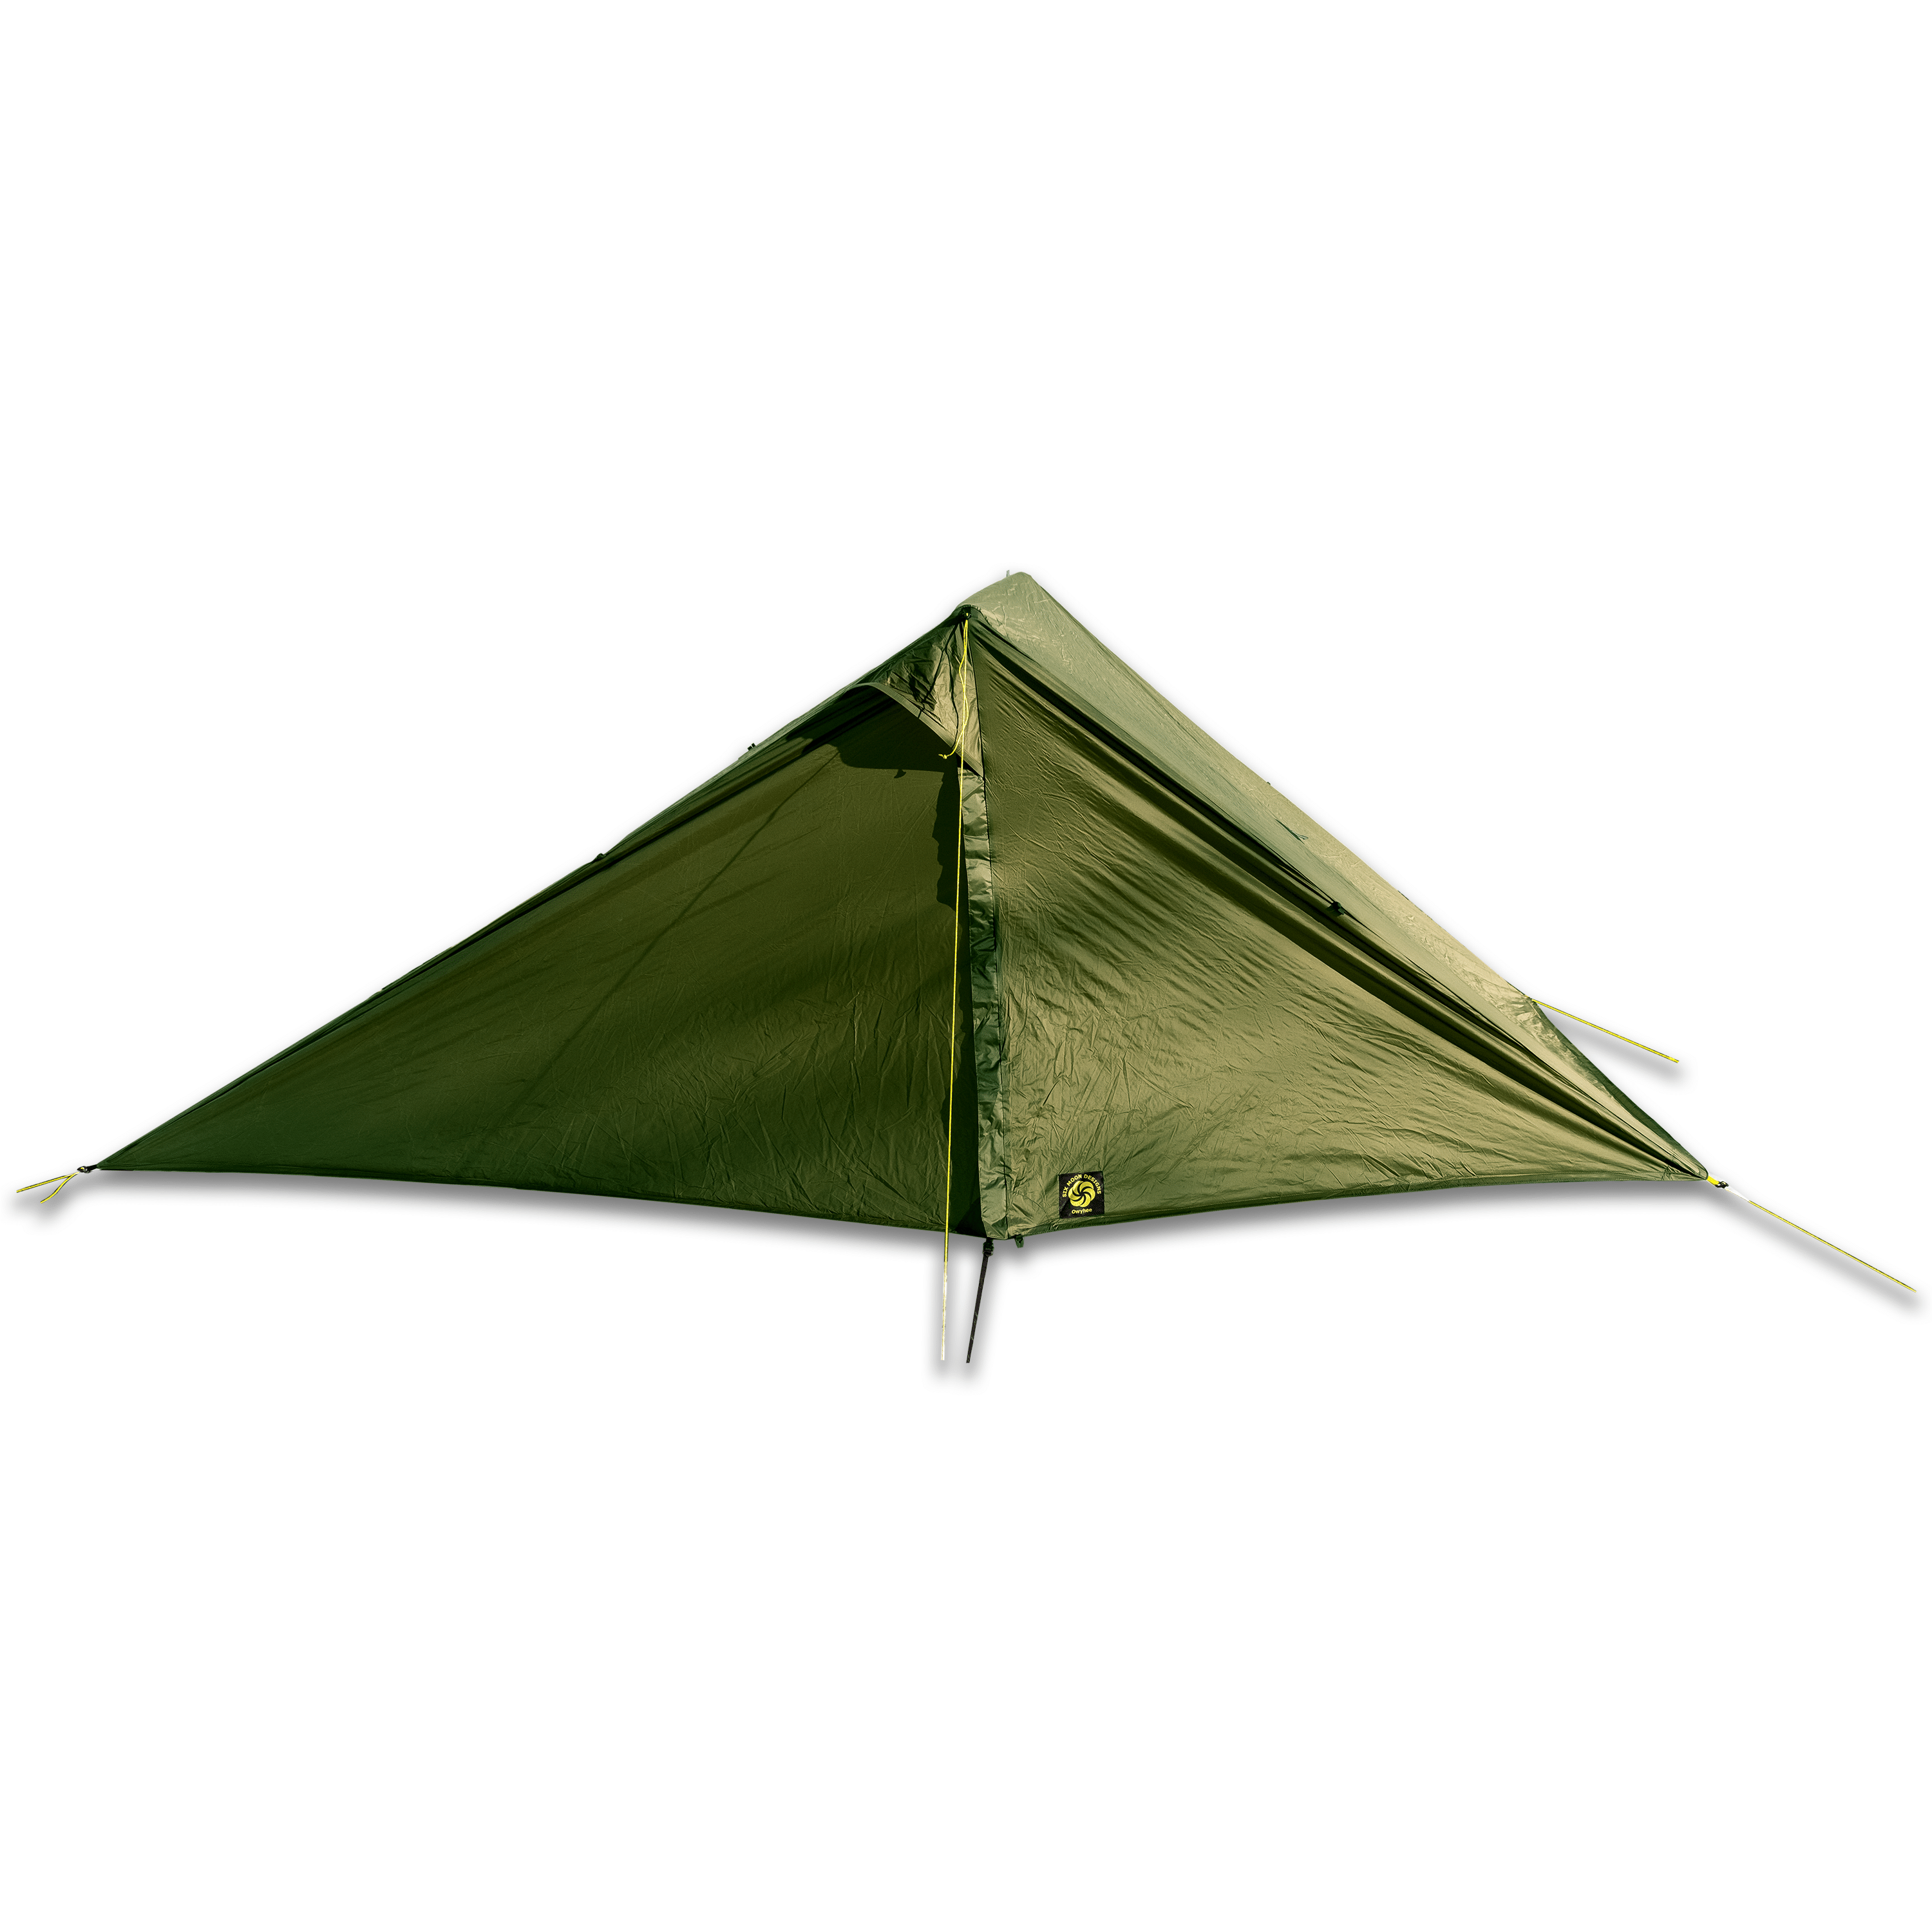 green triangle png